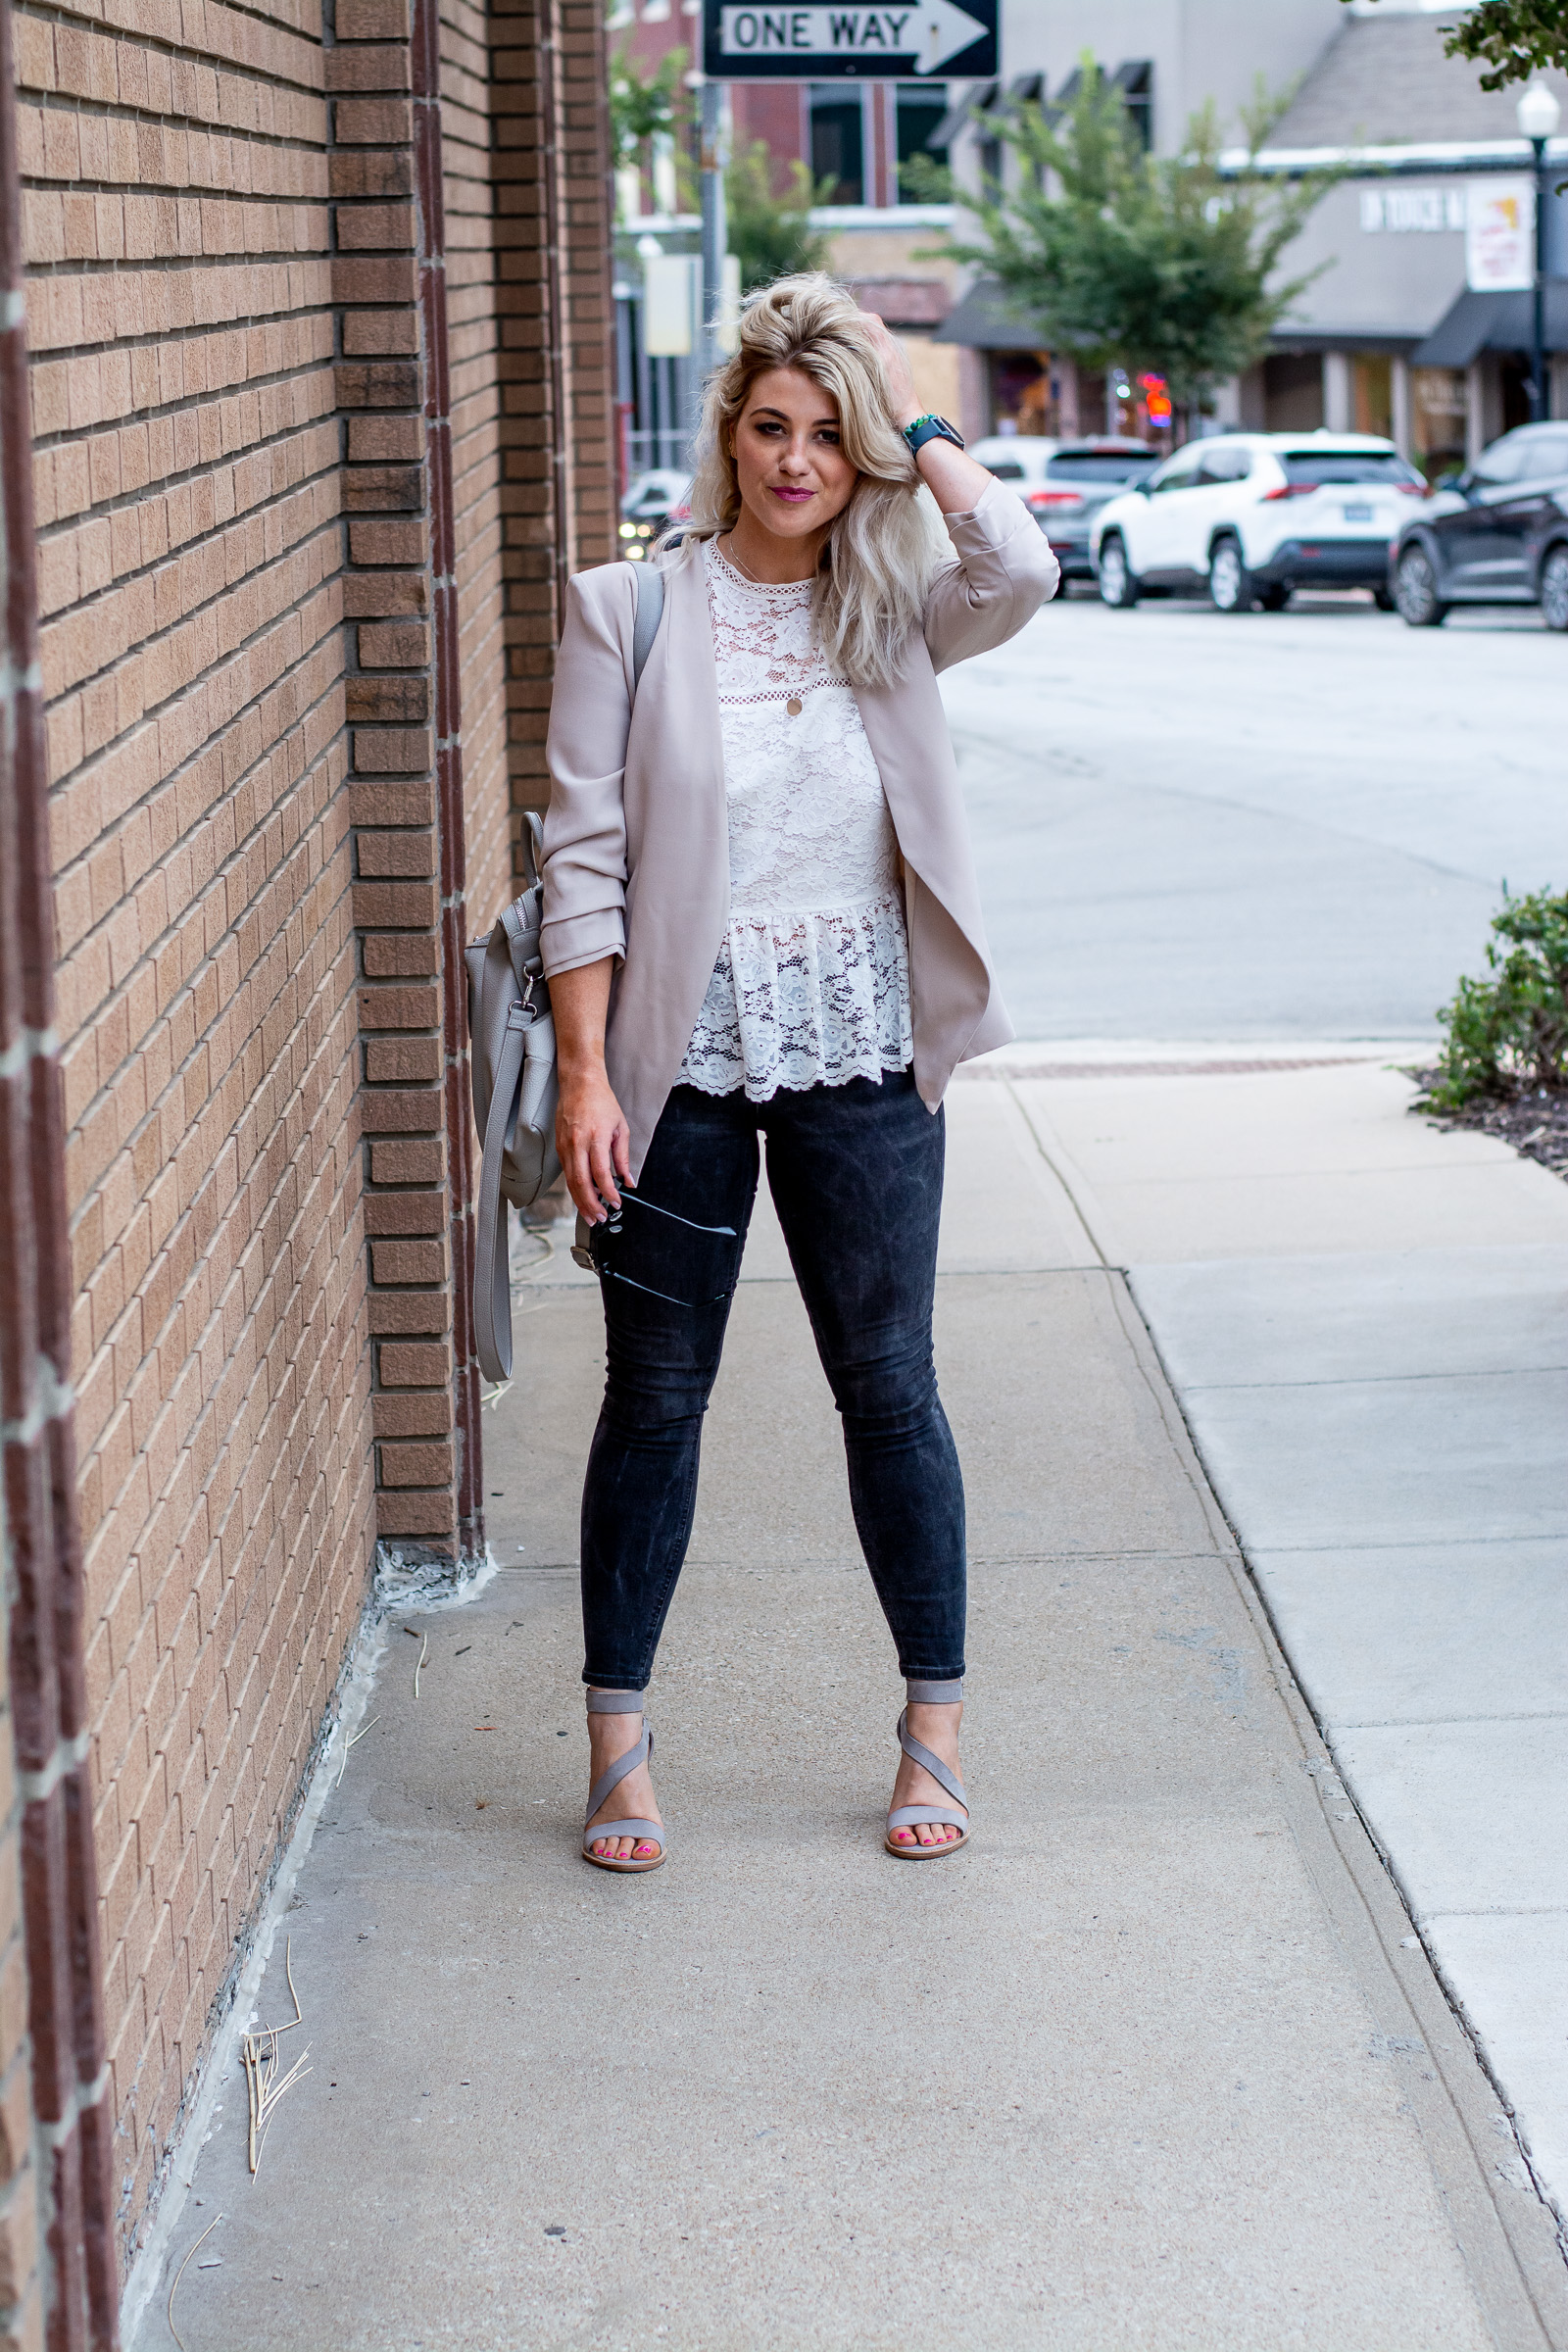 Easy Chic Outfit Idea: Neutral Blazer and a Lace Blouse. | LSR